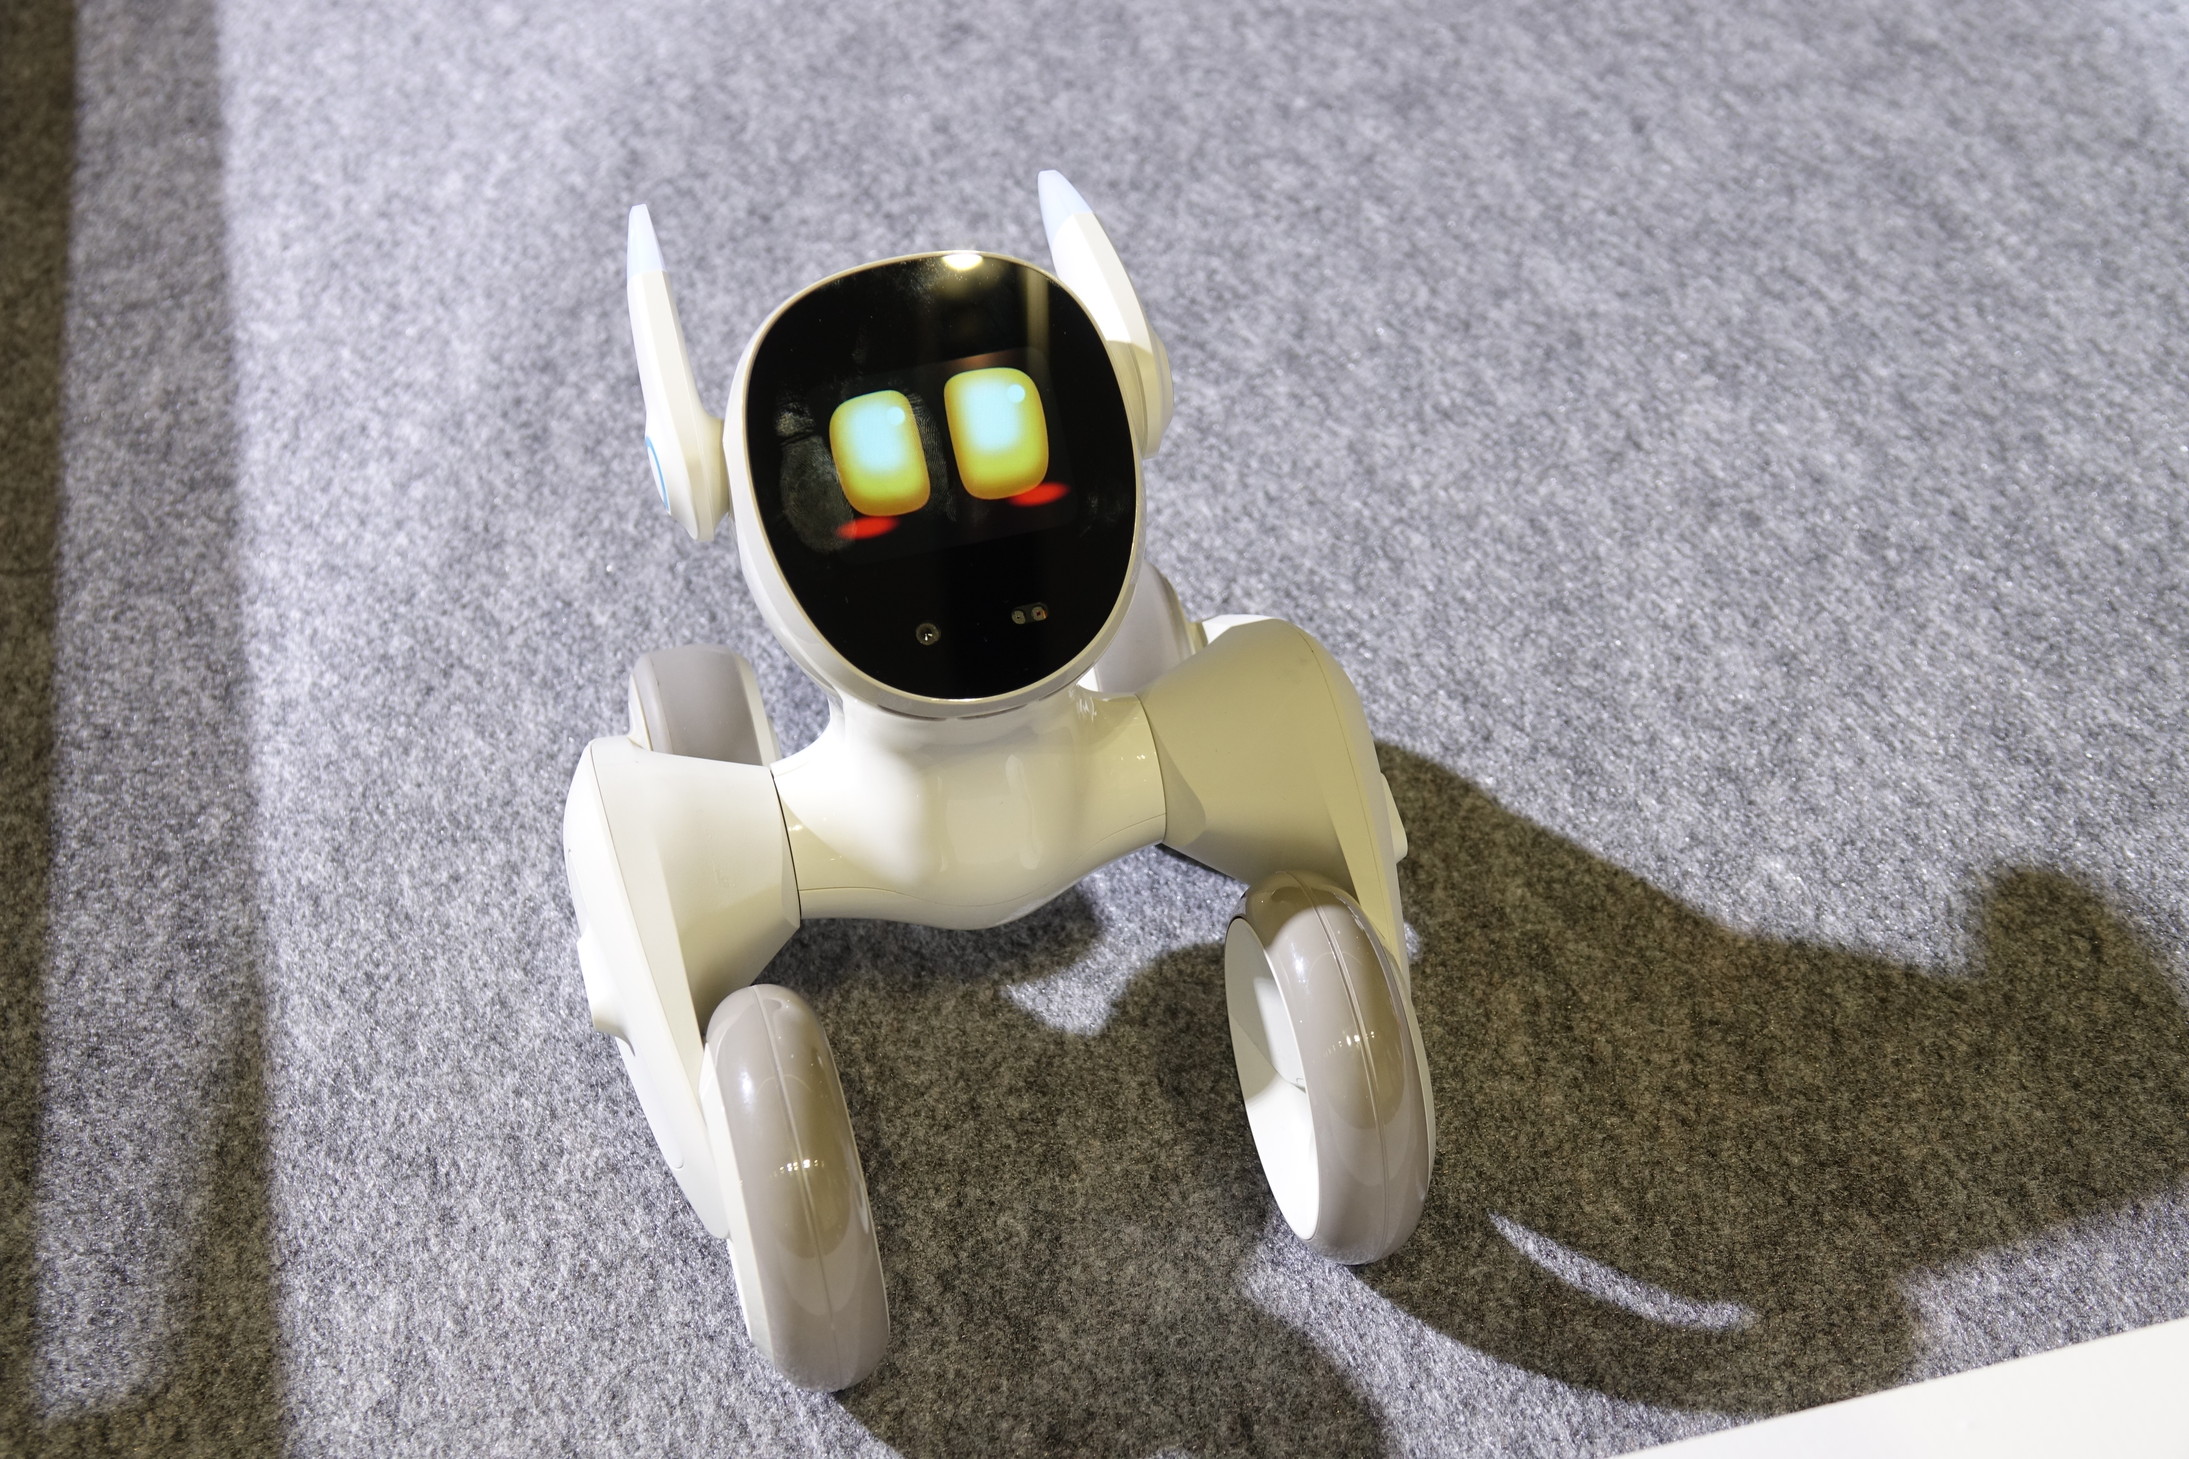 Loona PETBOT ペットロボット ルーナ All-inパッケージ - イヤフォン